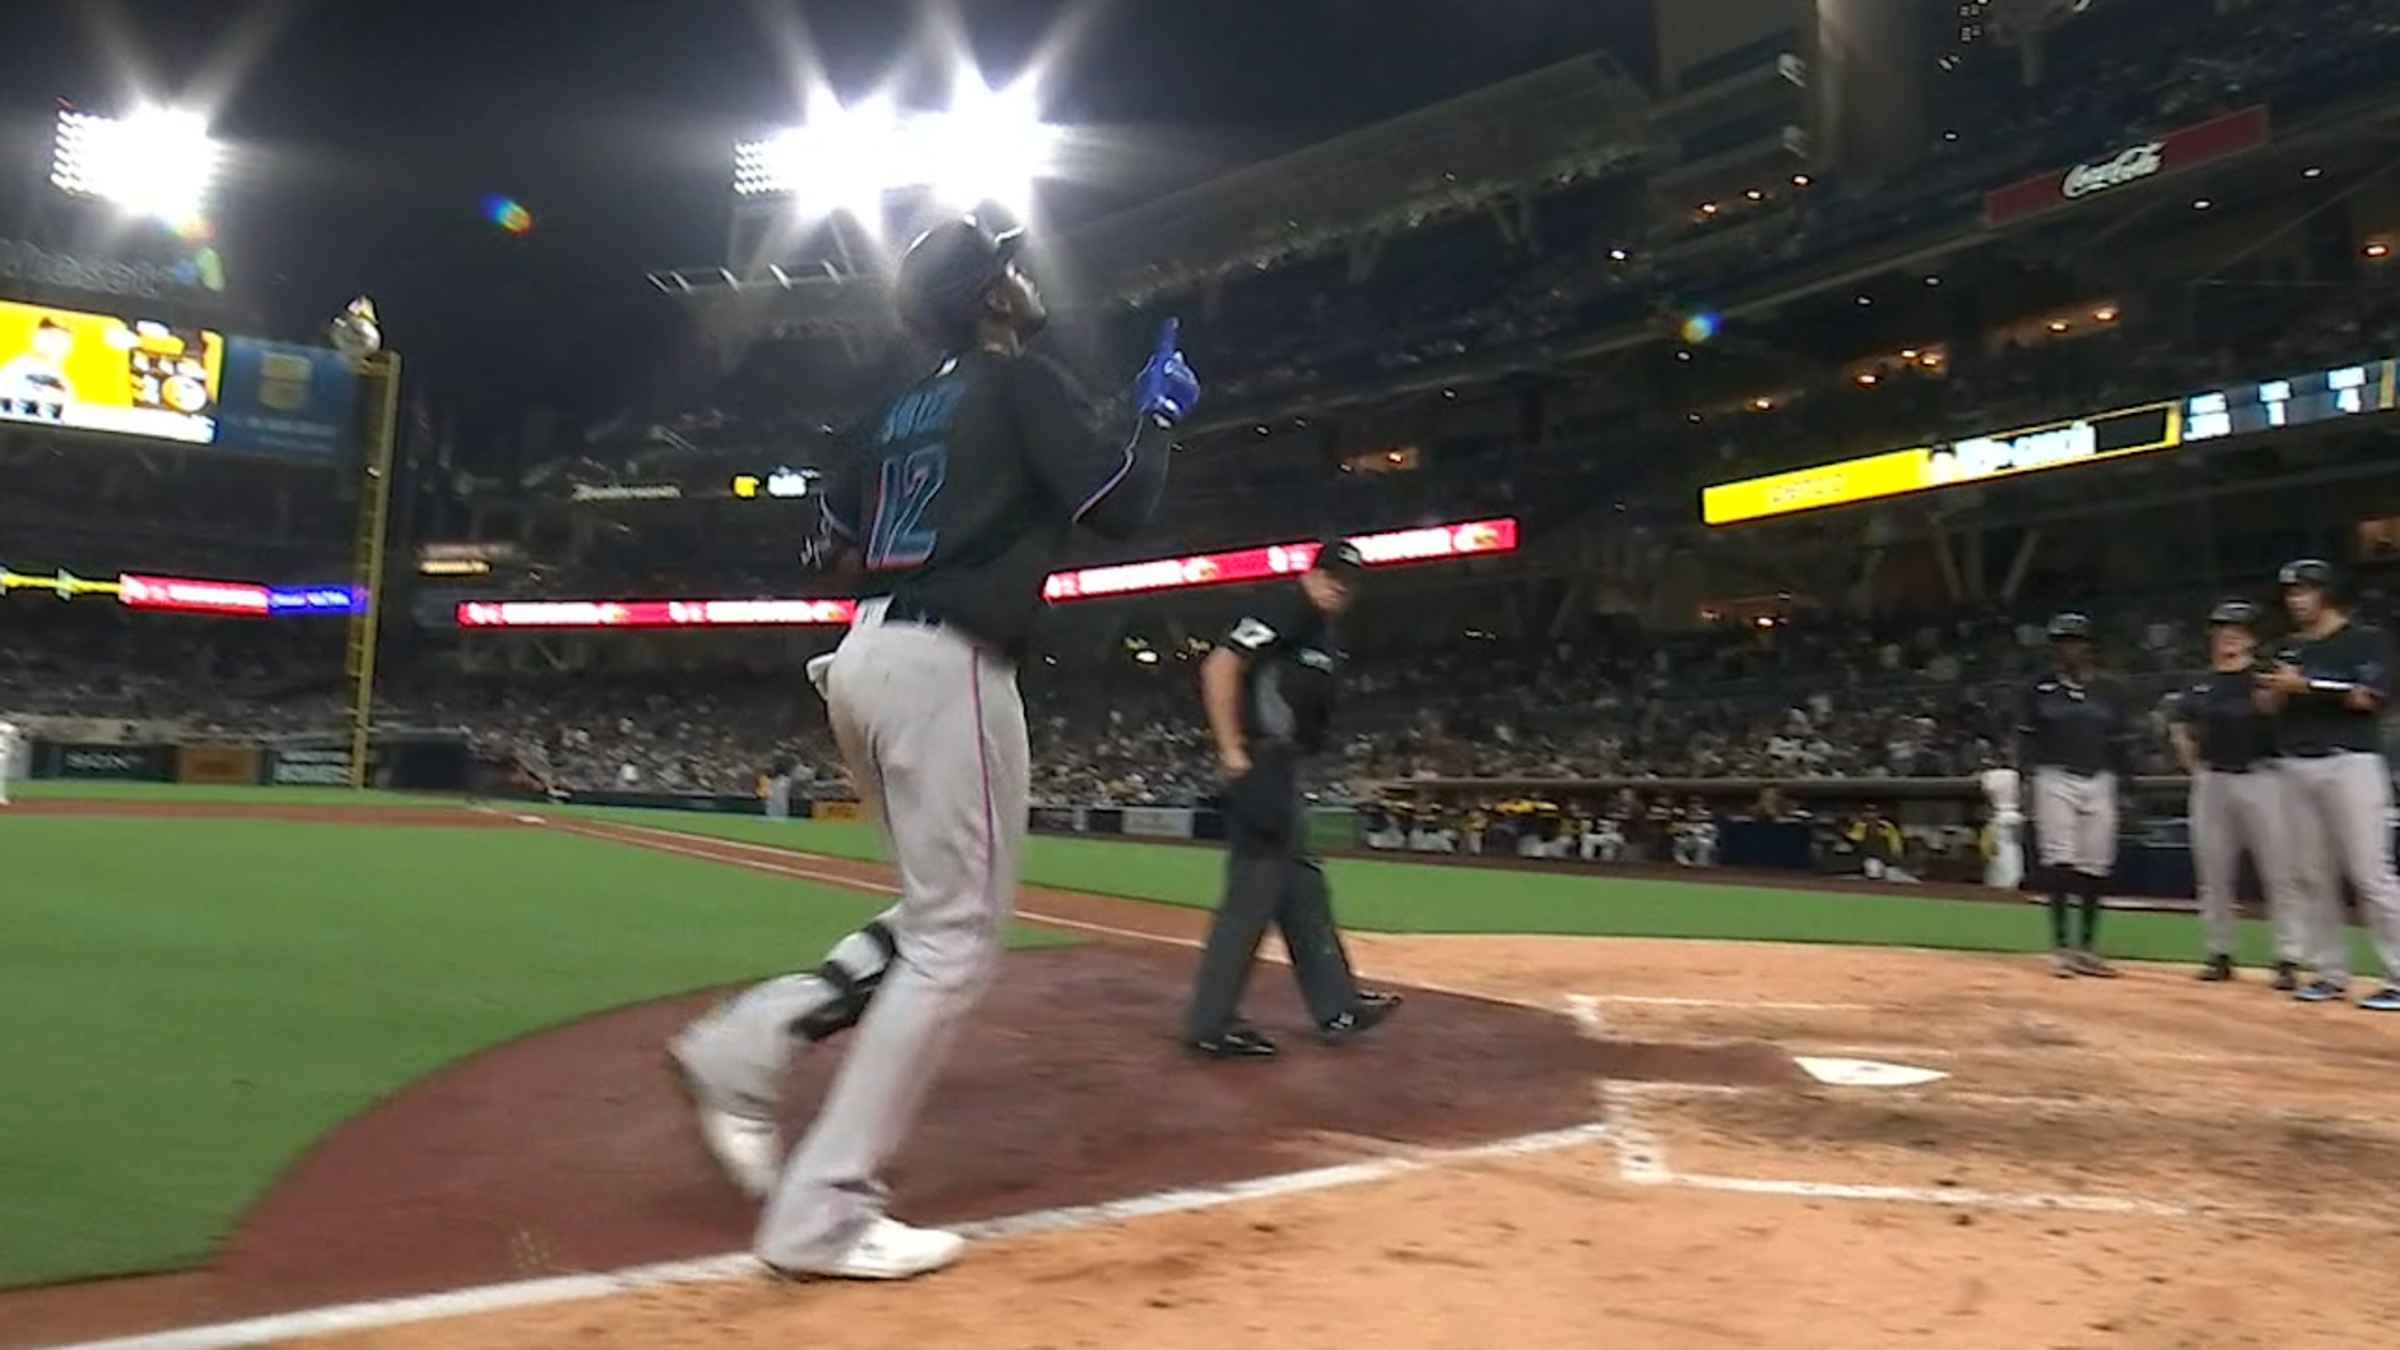 Marlins Jorge Soler Home Run off the Back of the Stadium 118mph Wow 